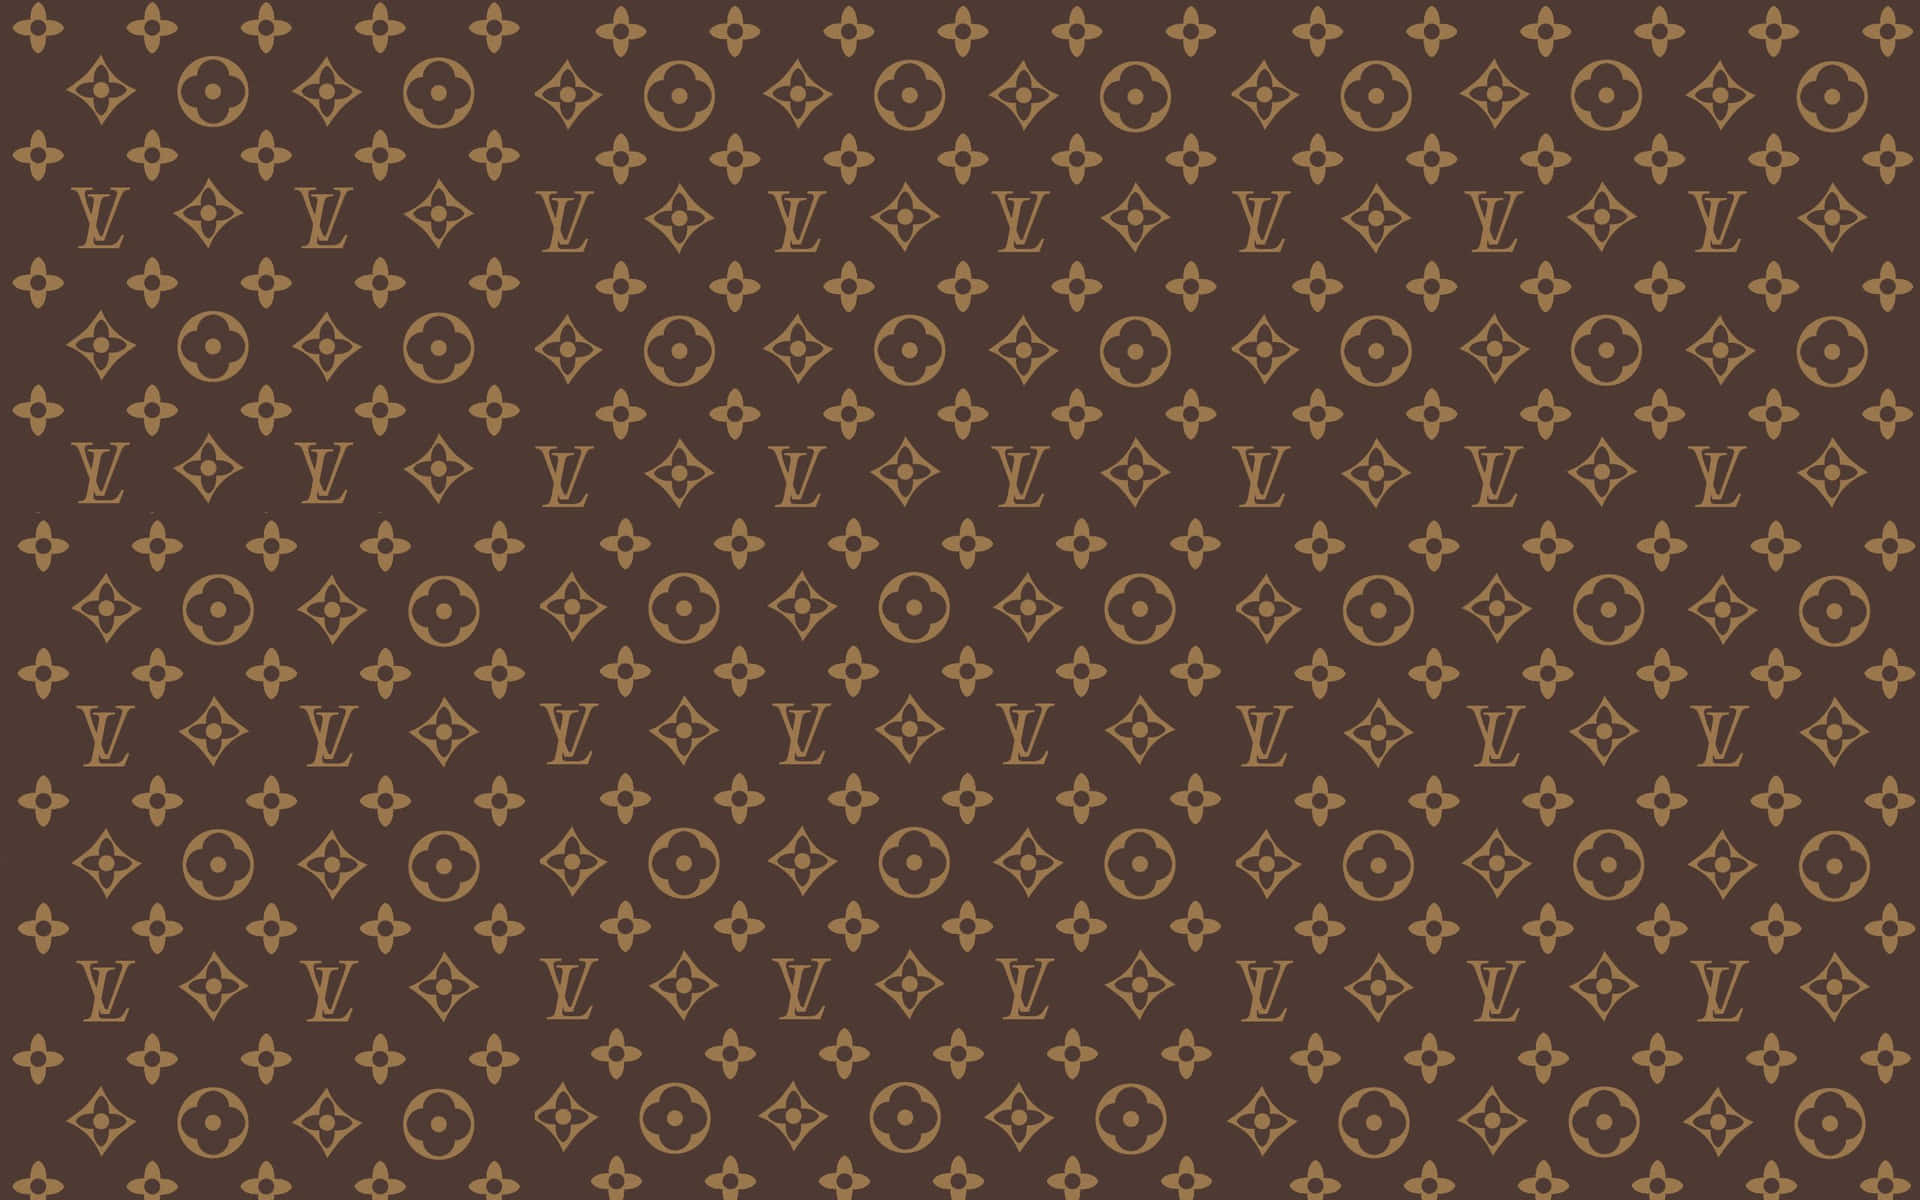 Download Show off your personal style with the Monogram Desktop. Wallpaper